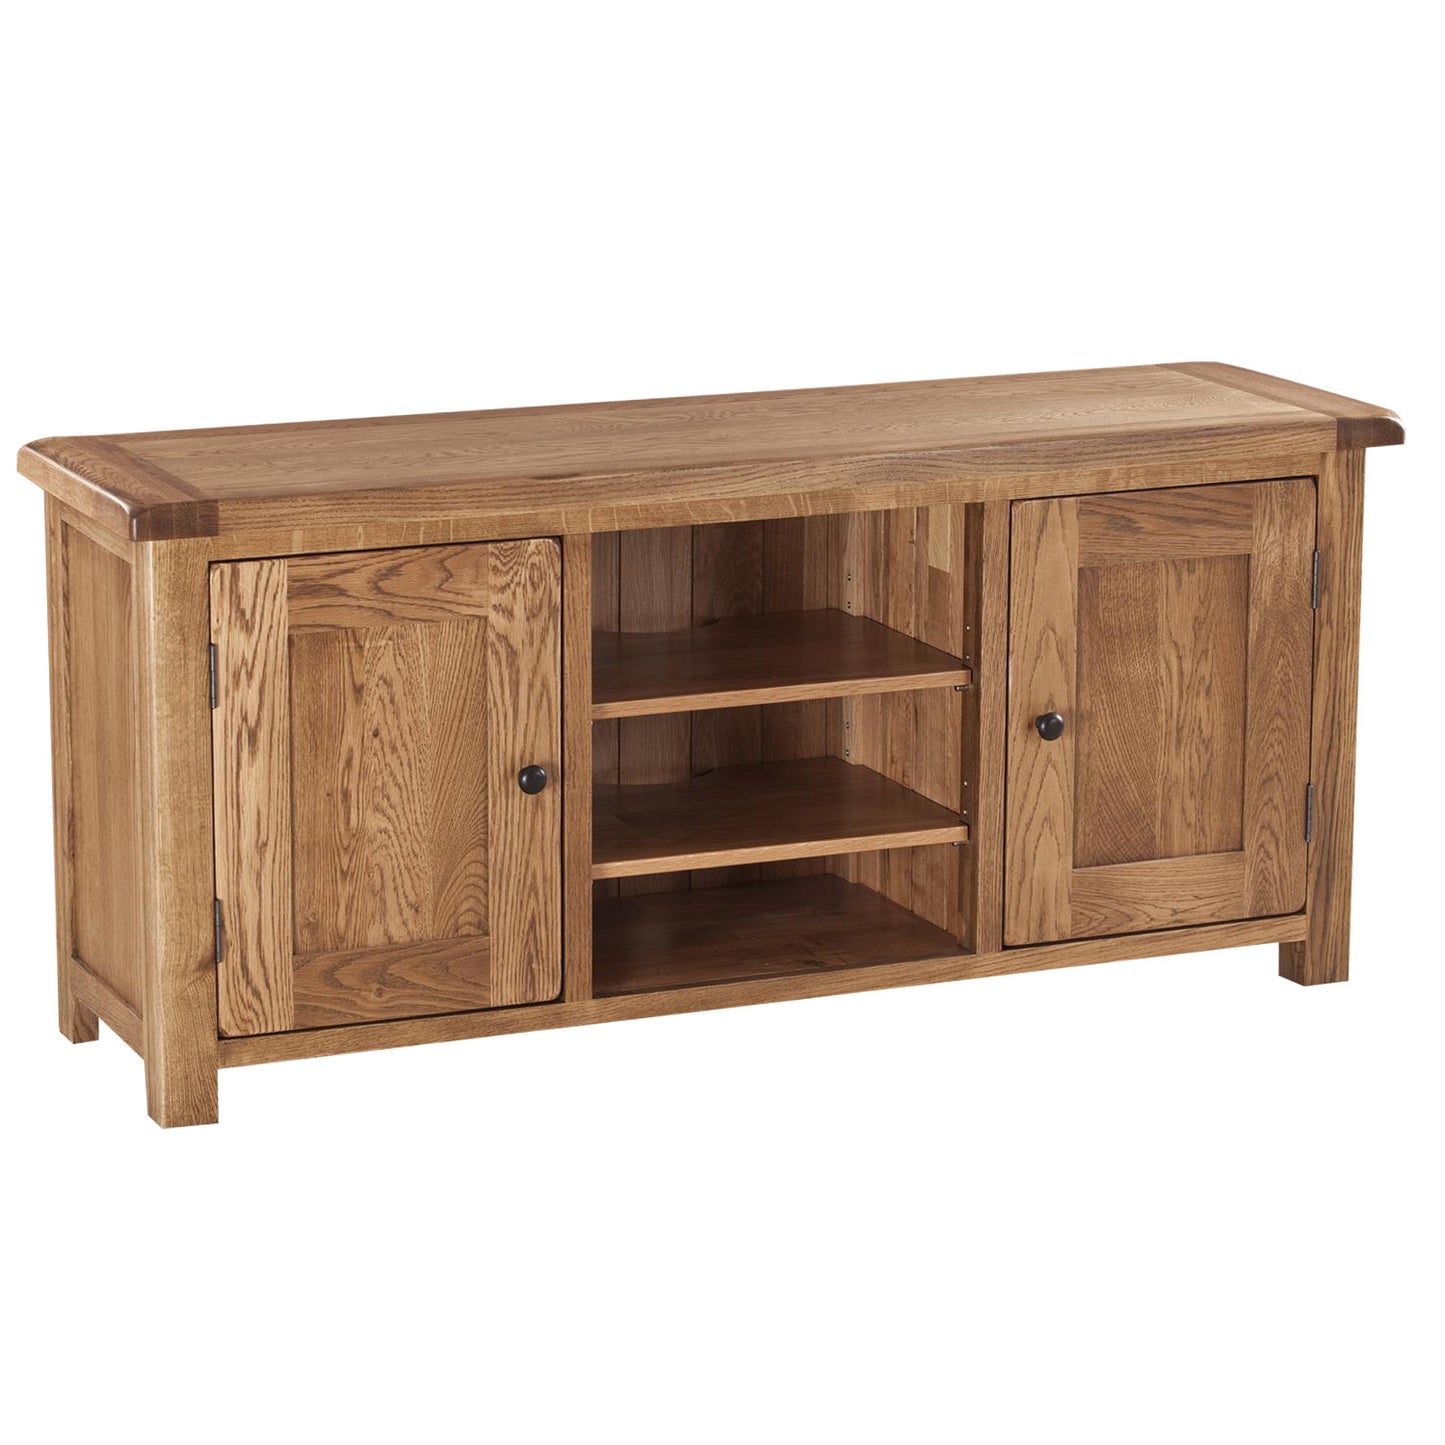 Auvergne Solid Oak TV Unit - Large - Better Furniture Norwich & Great Yarmouth